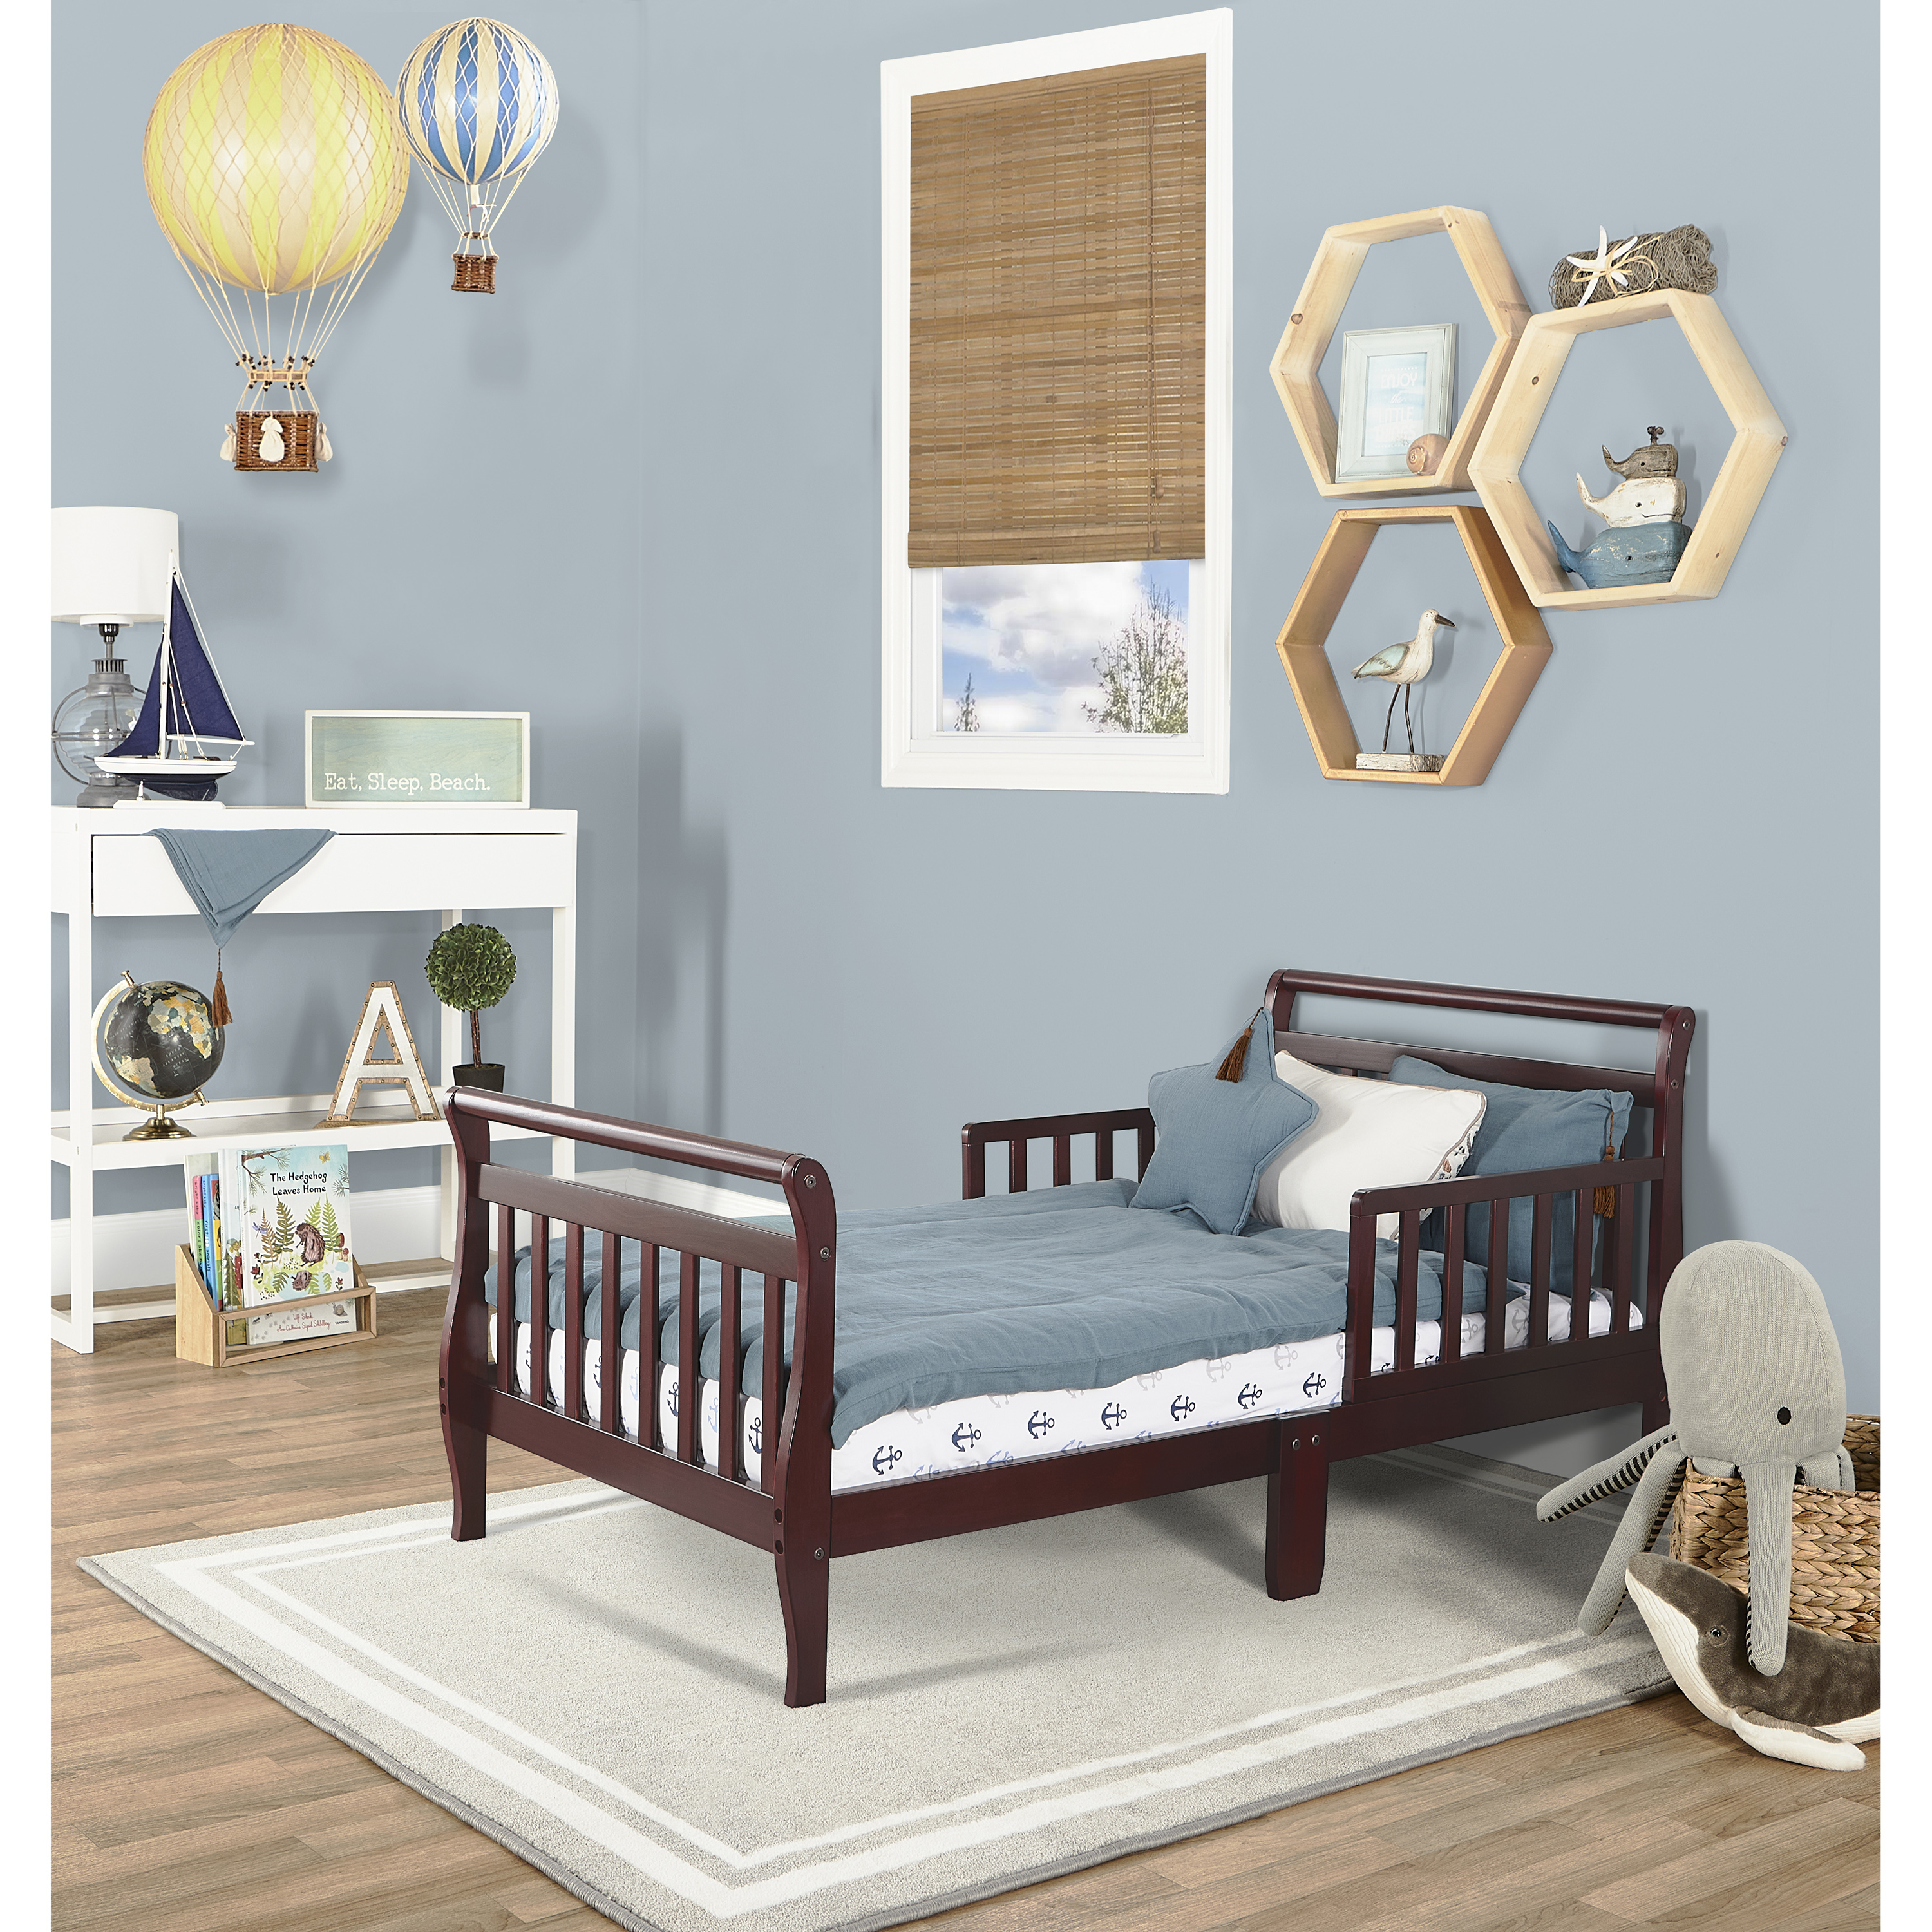 Dream On Me, Sleigh Toddler Bed, Cherry, Model #642-C - image 3 of 14